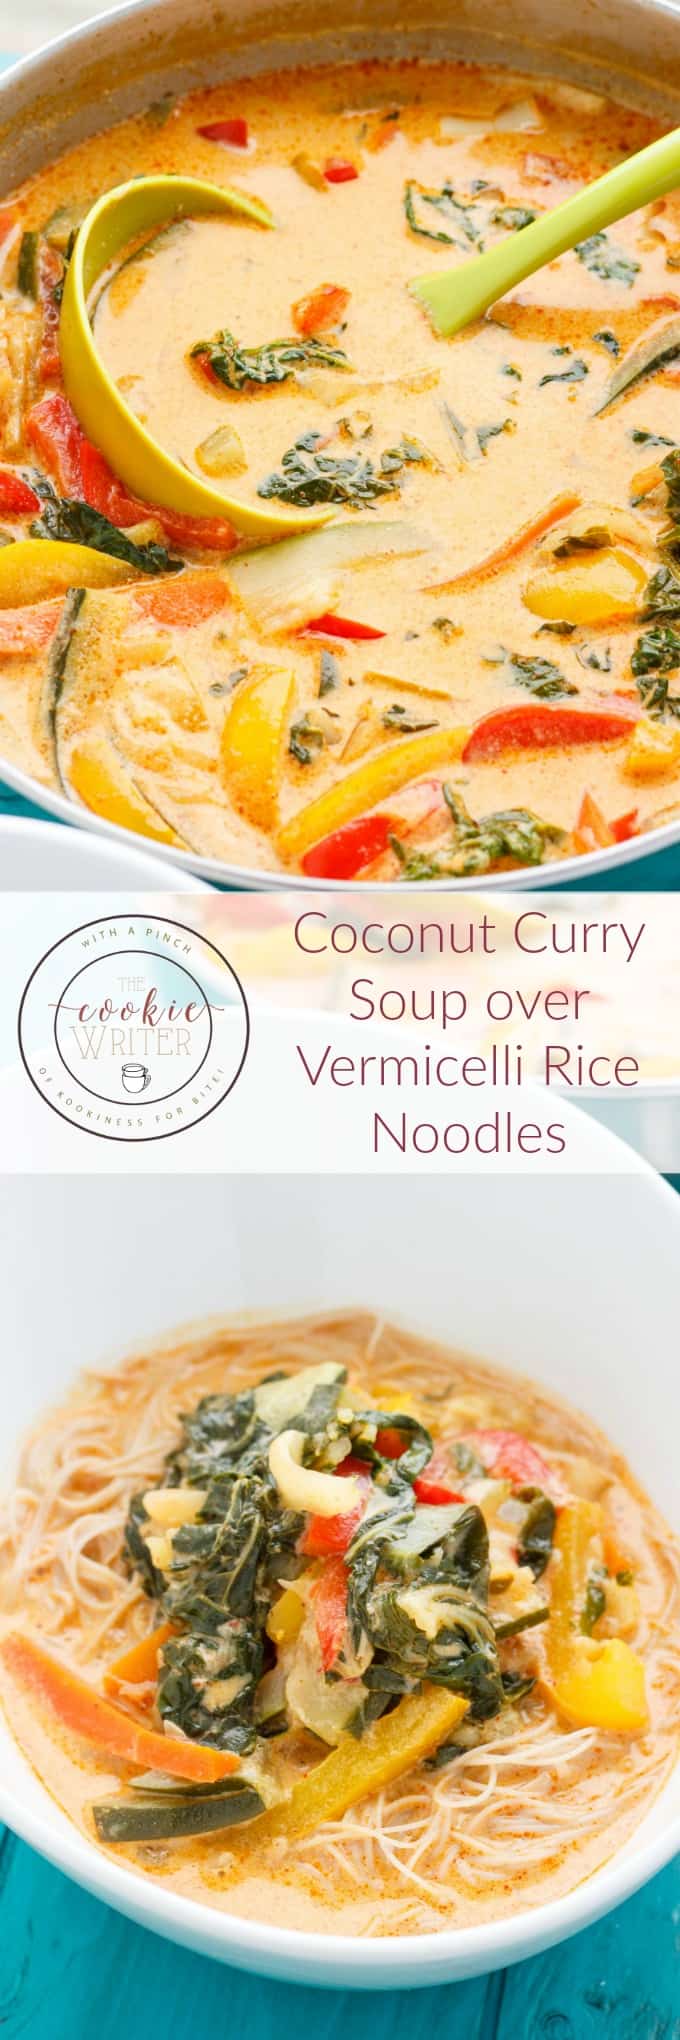 Coconut Curry Soup over Vermicelli Rice Noodles